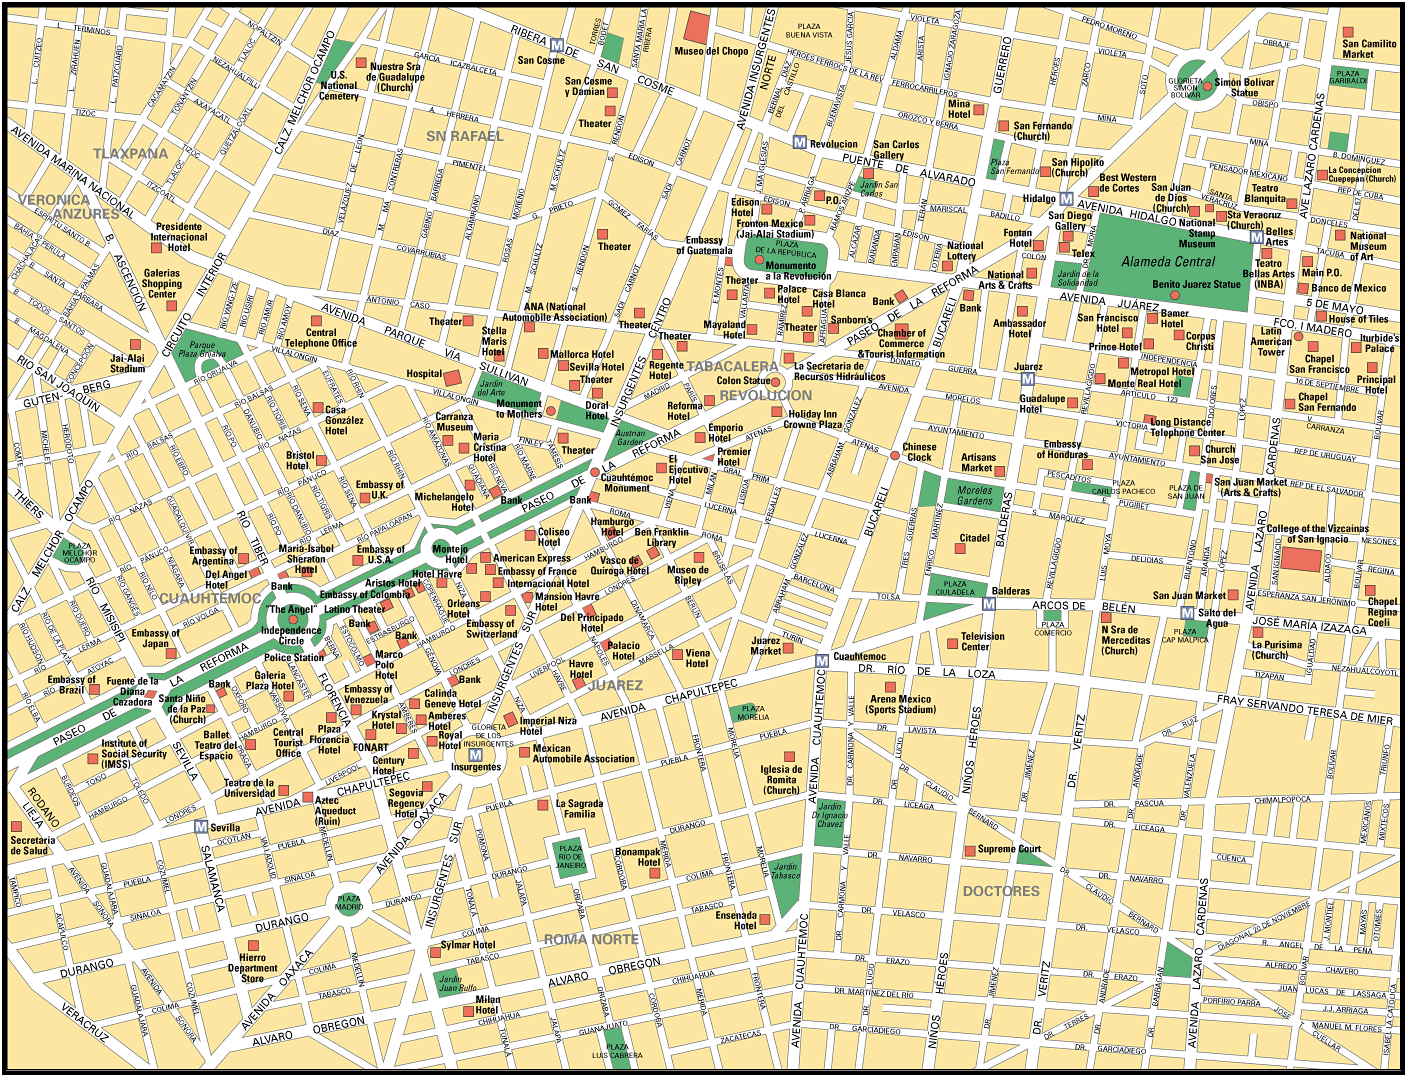 Map of Mexico City_6.jpg